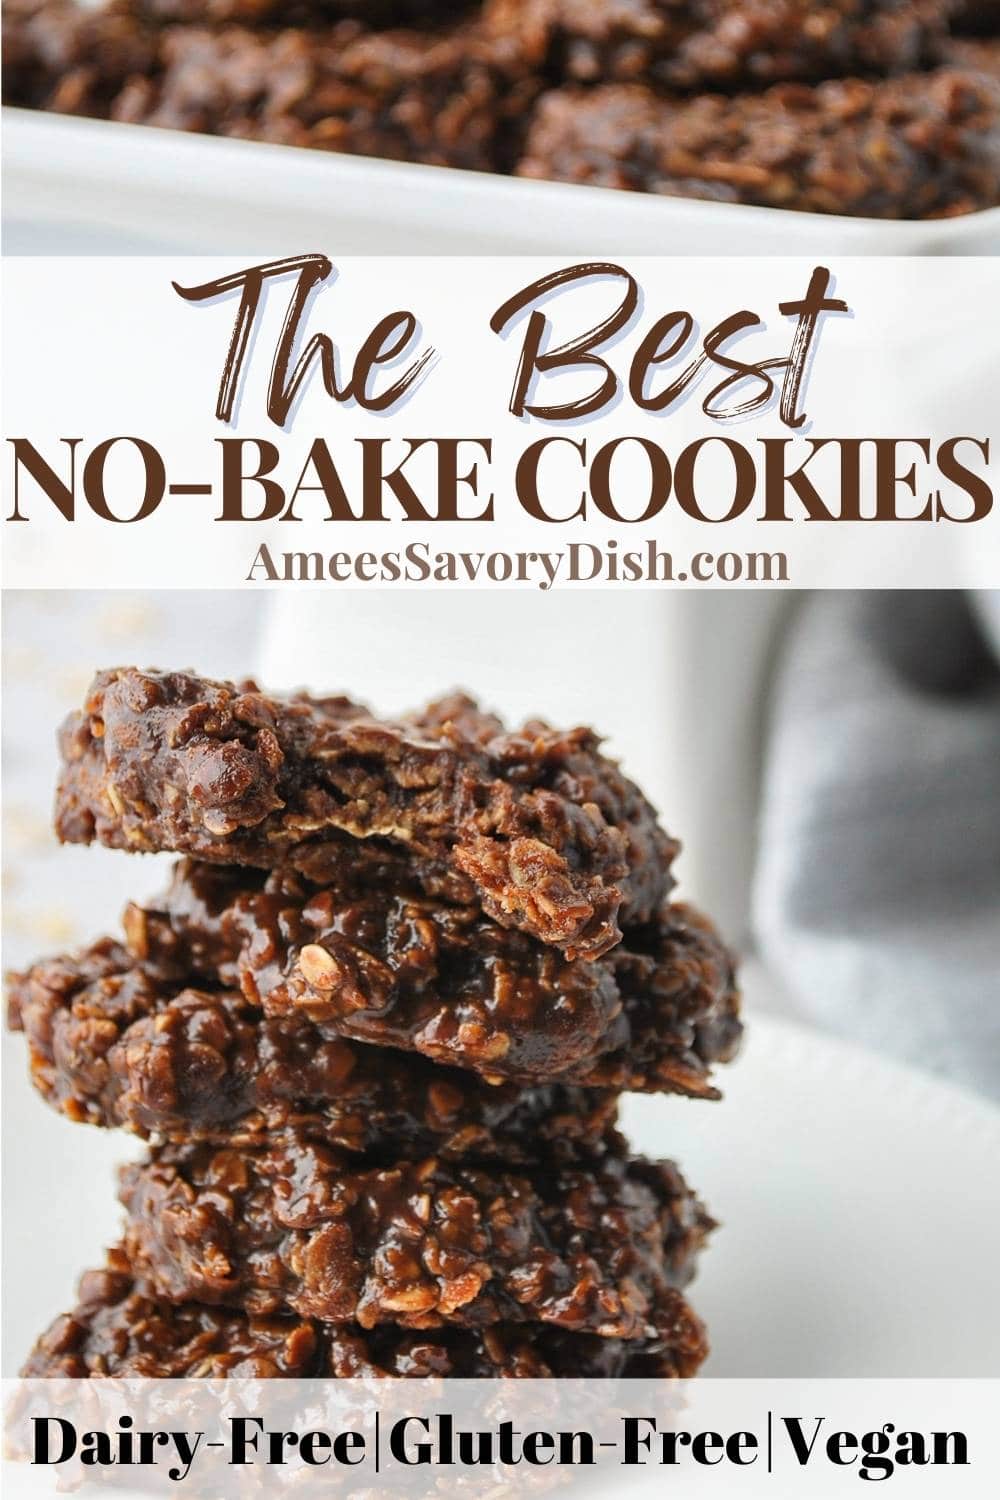 This Dairy-Free No-Bake Cookies recipe makes soft and chewy chocolate-peanut butter oatmeal cookies with healthy ingredients in just 10 minutes -no baking needed! via @Ameessavorydish